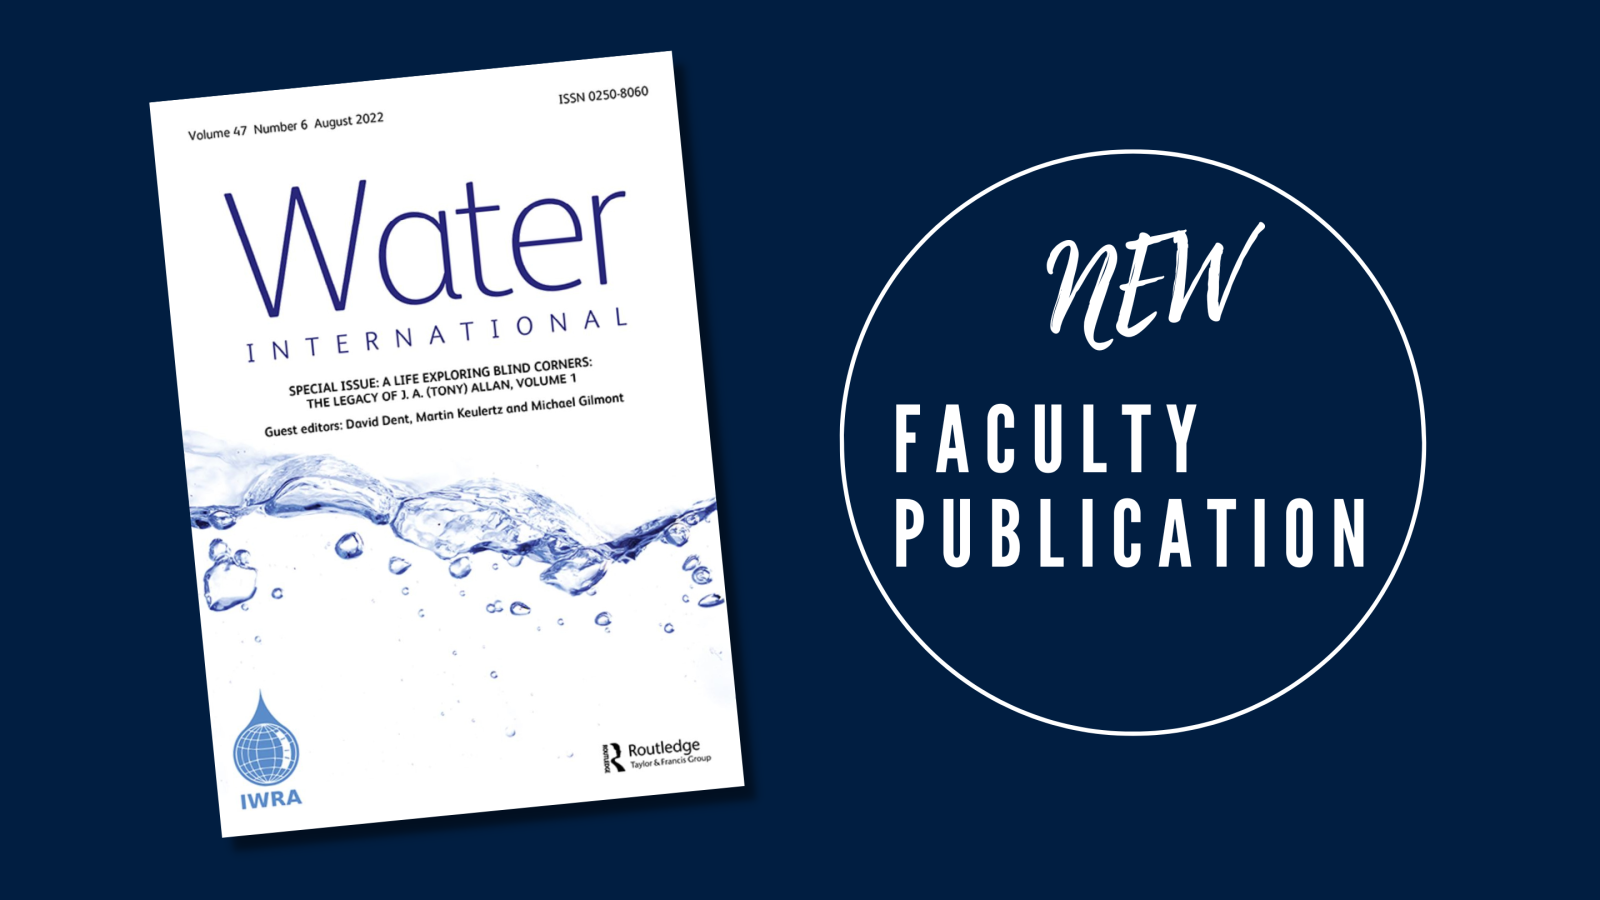 Banner that says &quot;New Faculty Publication&quot; with image of the cover of Water International journal